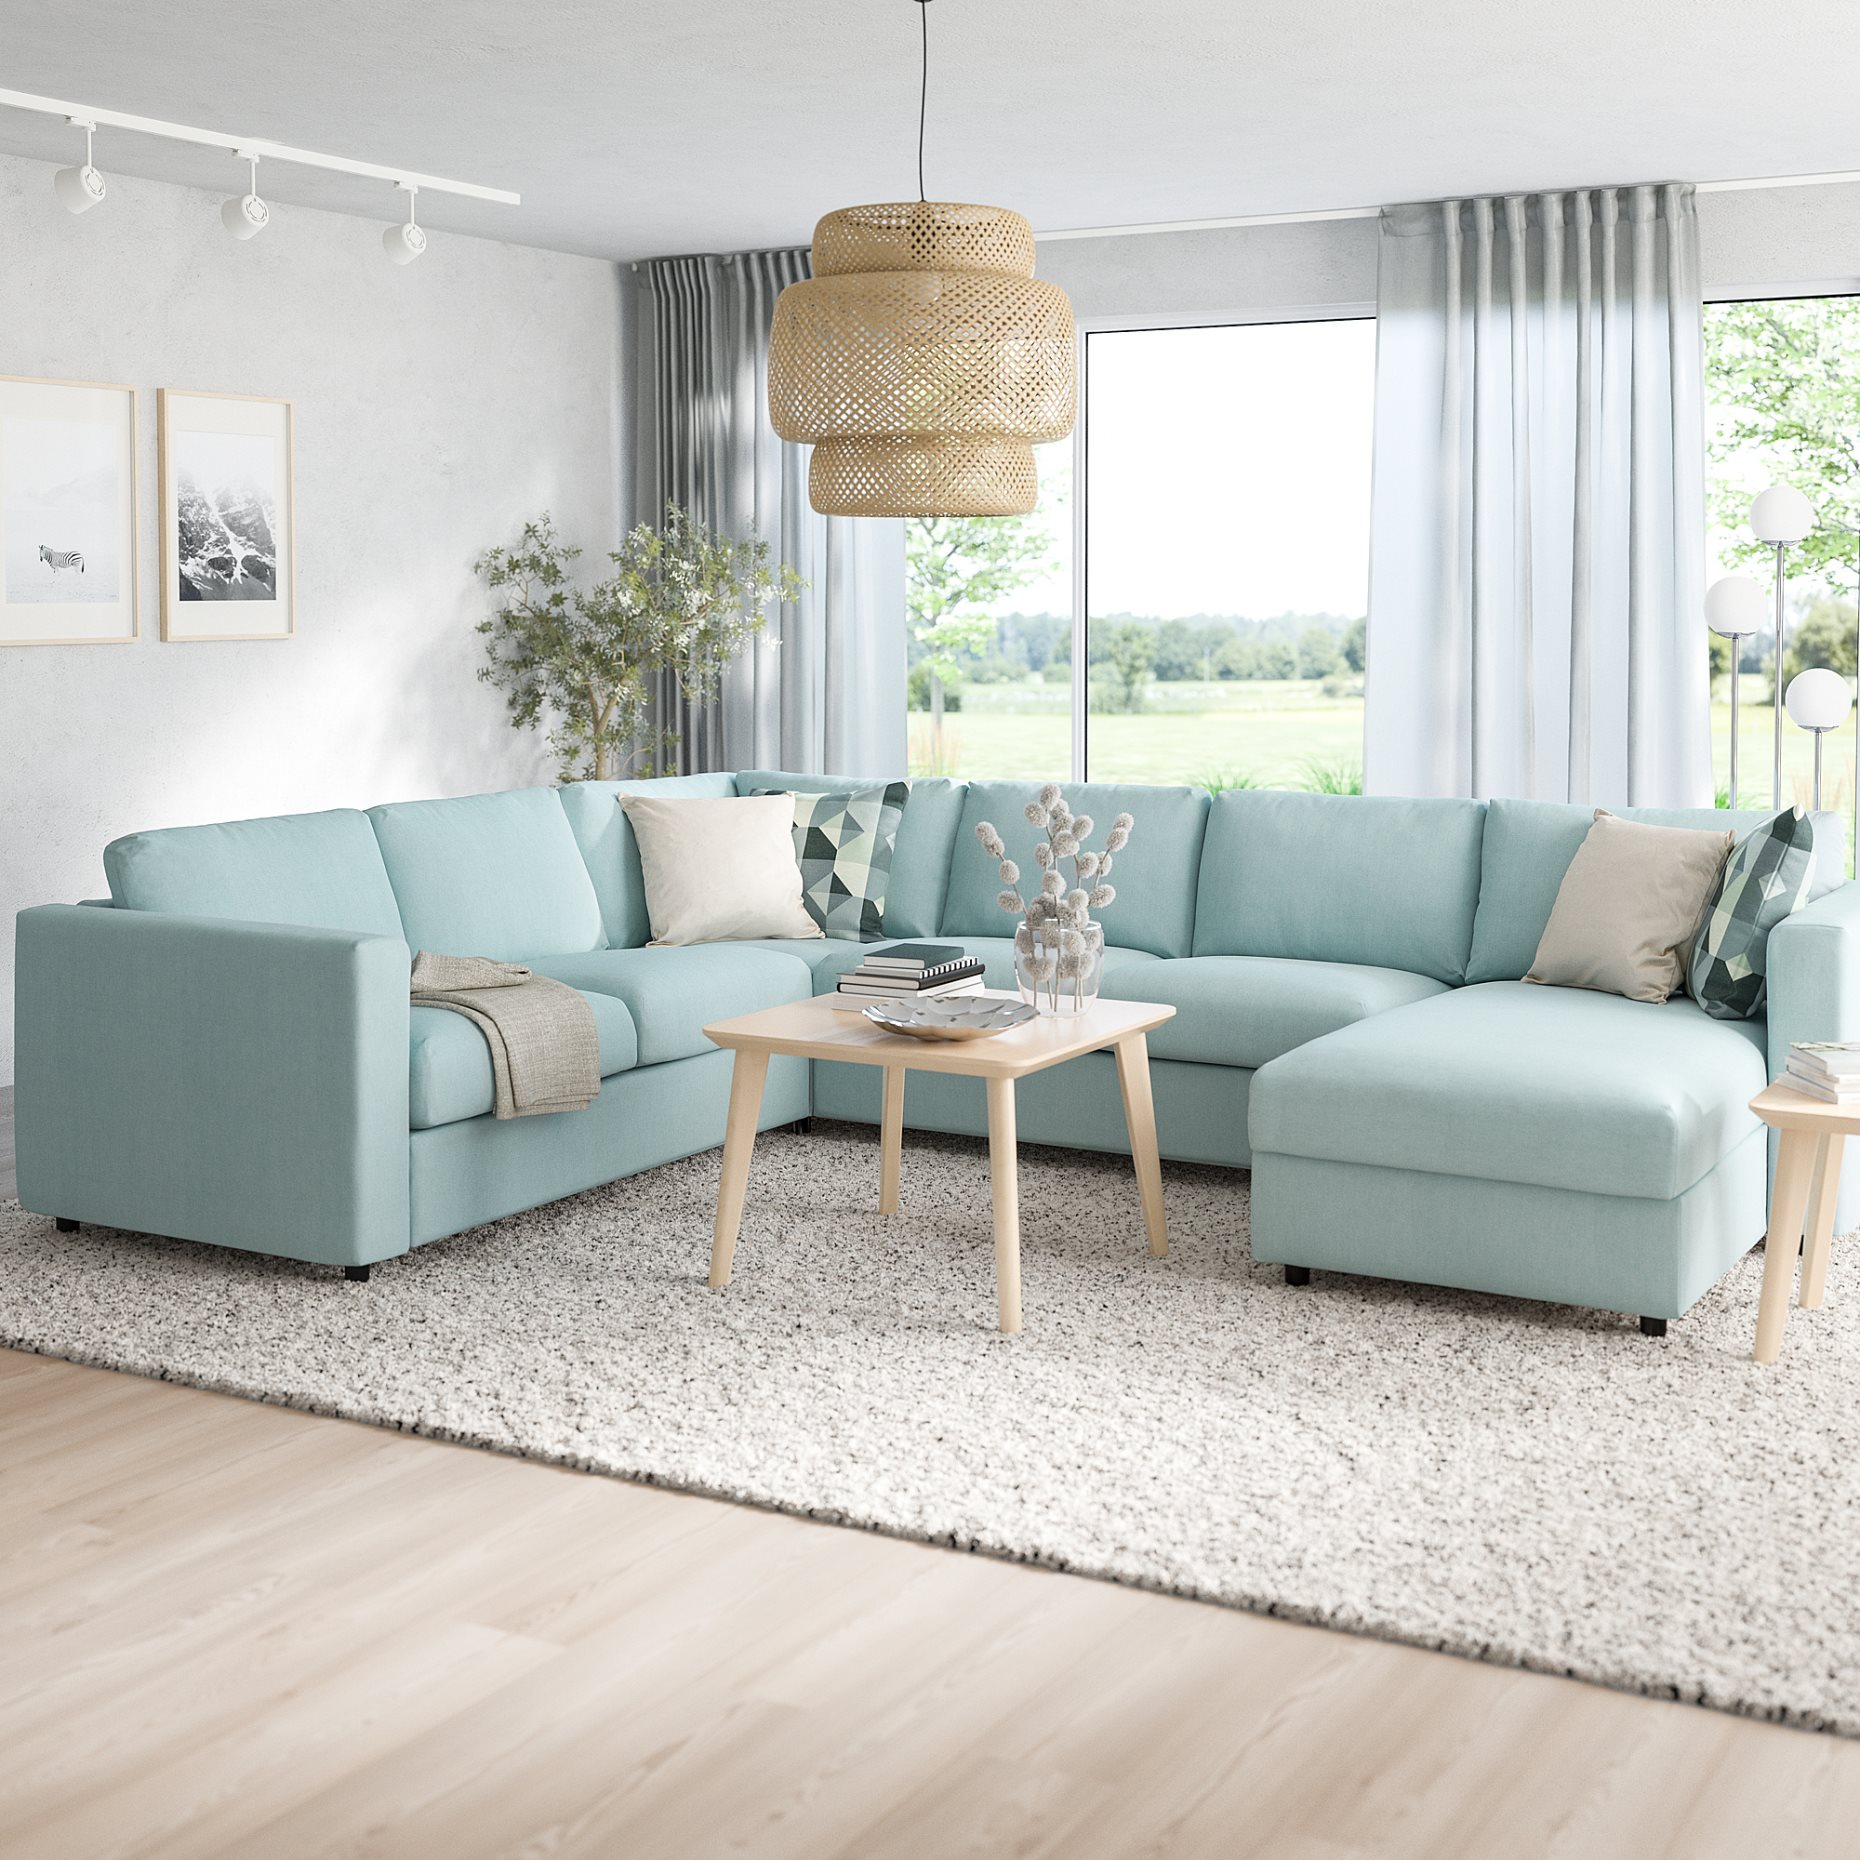 VIMLE, corner sofa-bed, 5-seat with chaise longue, 095.371.72